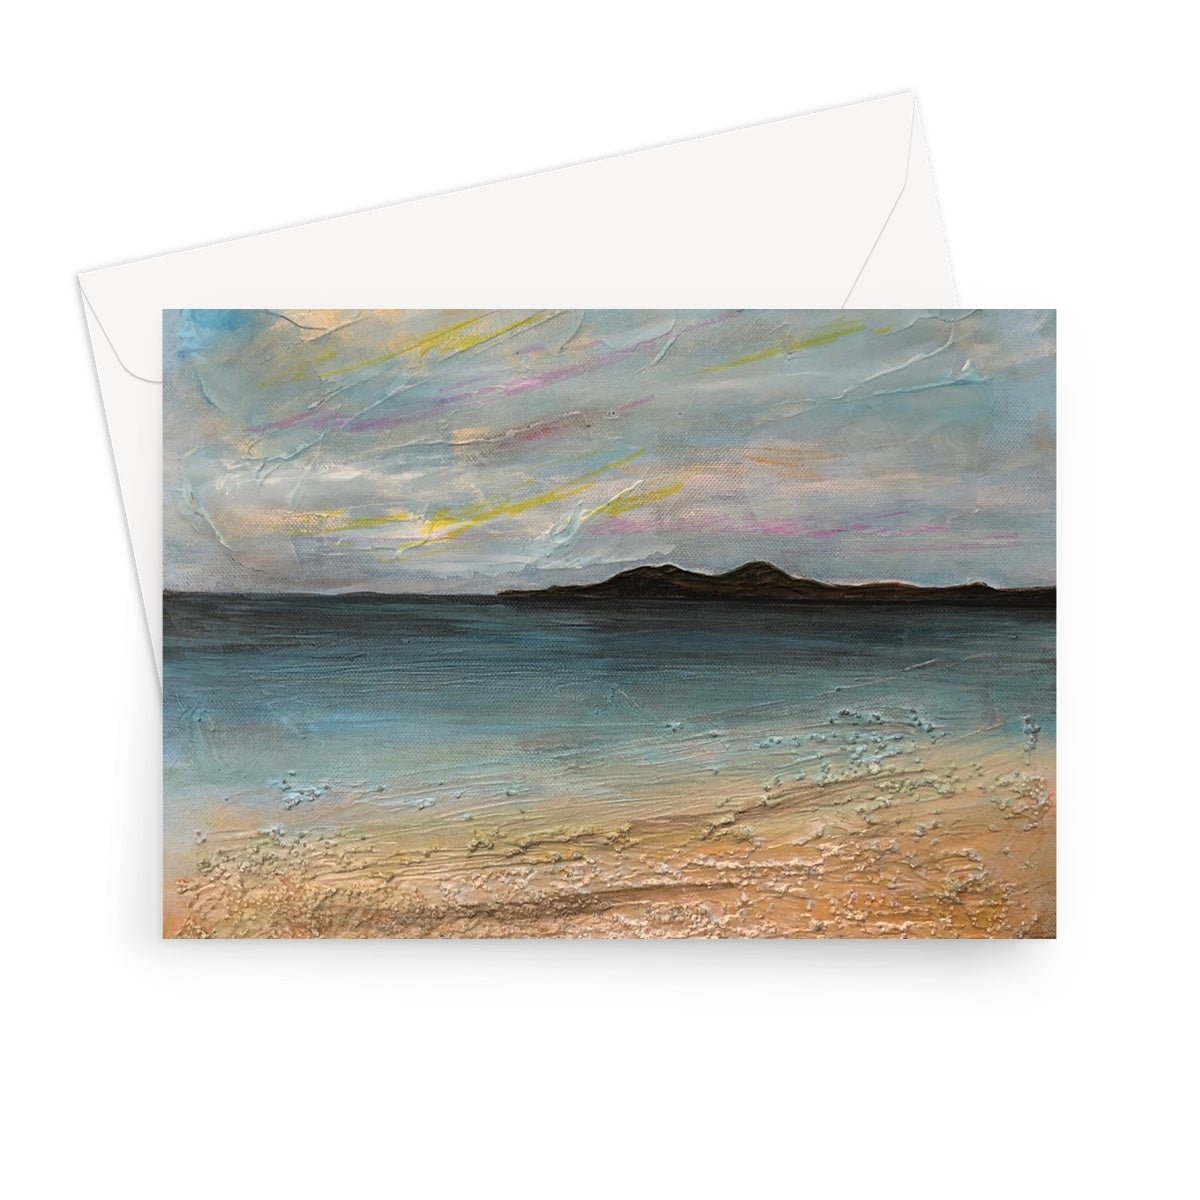 Garrynamonie Beach South Uist Art Gifts Greeting Card-Greetings Cards-Hebridean Islands Art Gallery-7"x5"-10 Cards-Paintings, Prints, Homeware, Art Gifts From Scotland By Scottish Artist Kevin Hunter